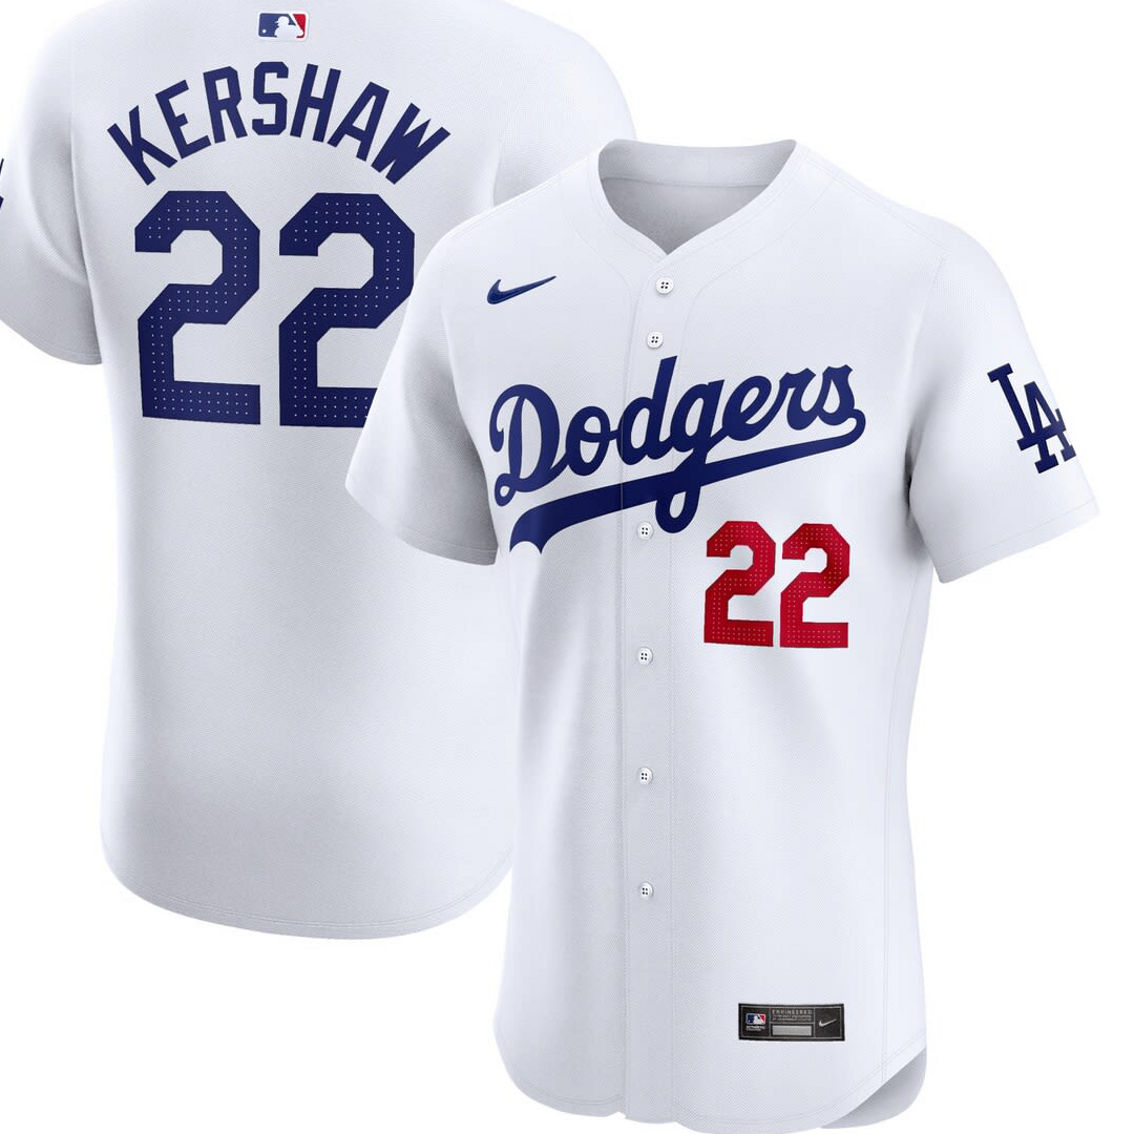 Nike Men's Clayton Kershaw White Los Angeles Dodgers Home Elite Player Jersey - Image 2 of 4